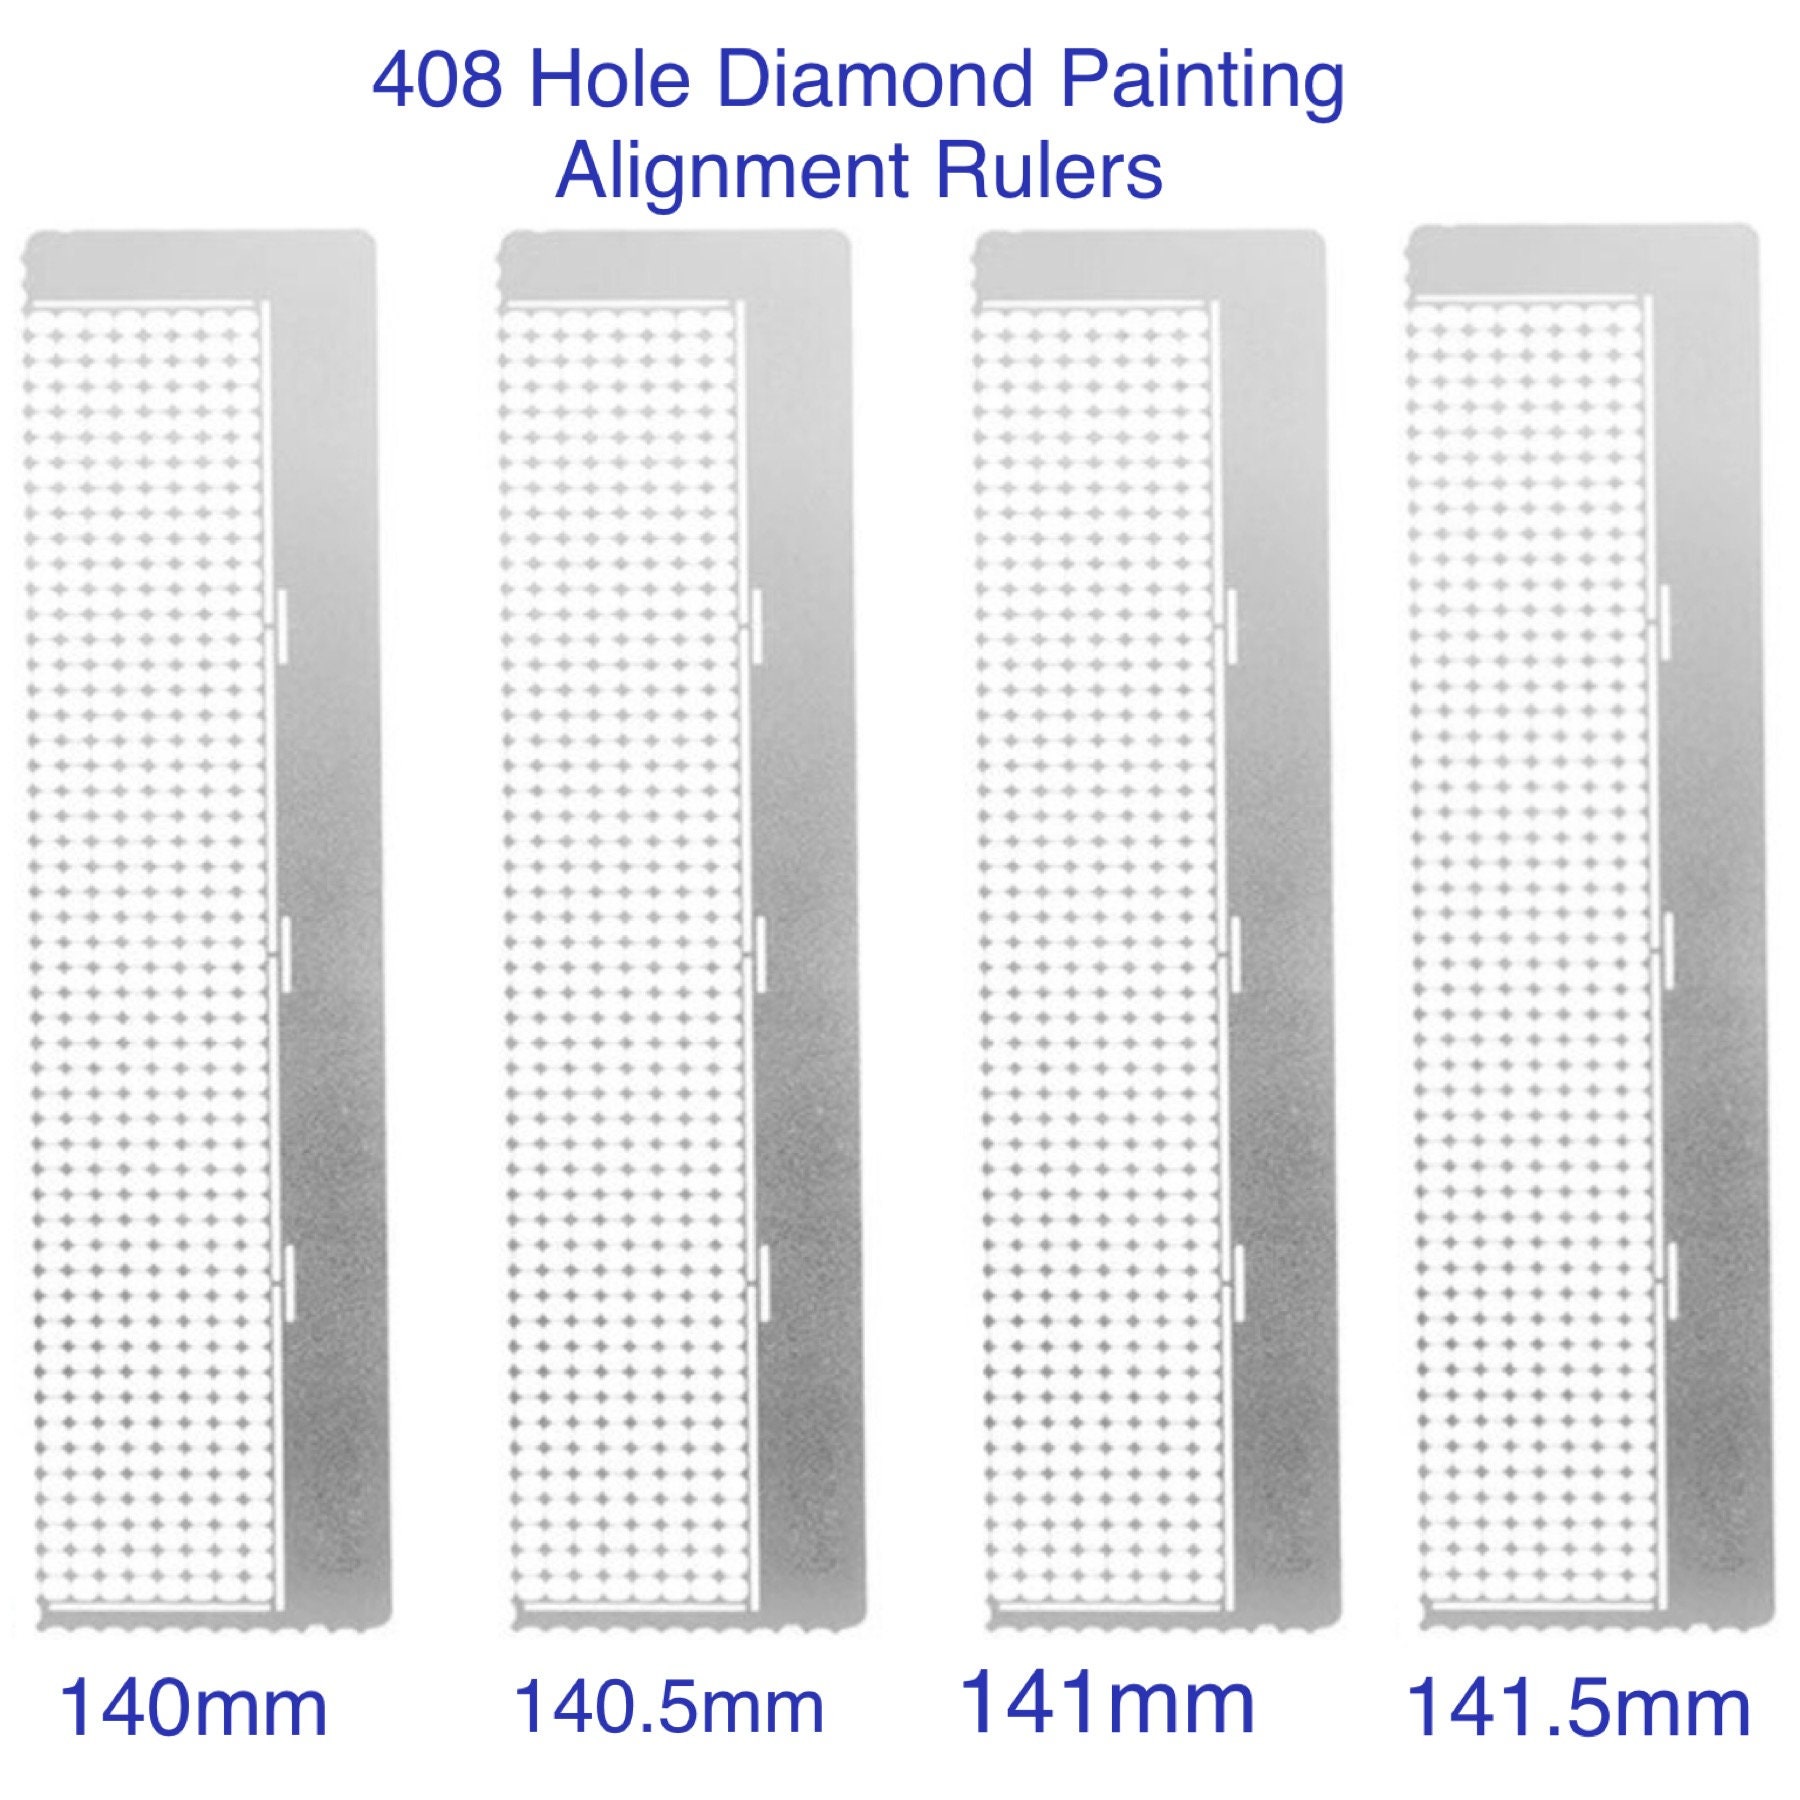 Alignment Ruler for Diamond Painting Pen & Cross Stitching, 238 Square Gem  Slots for Even Diamond Placement 